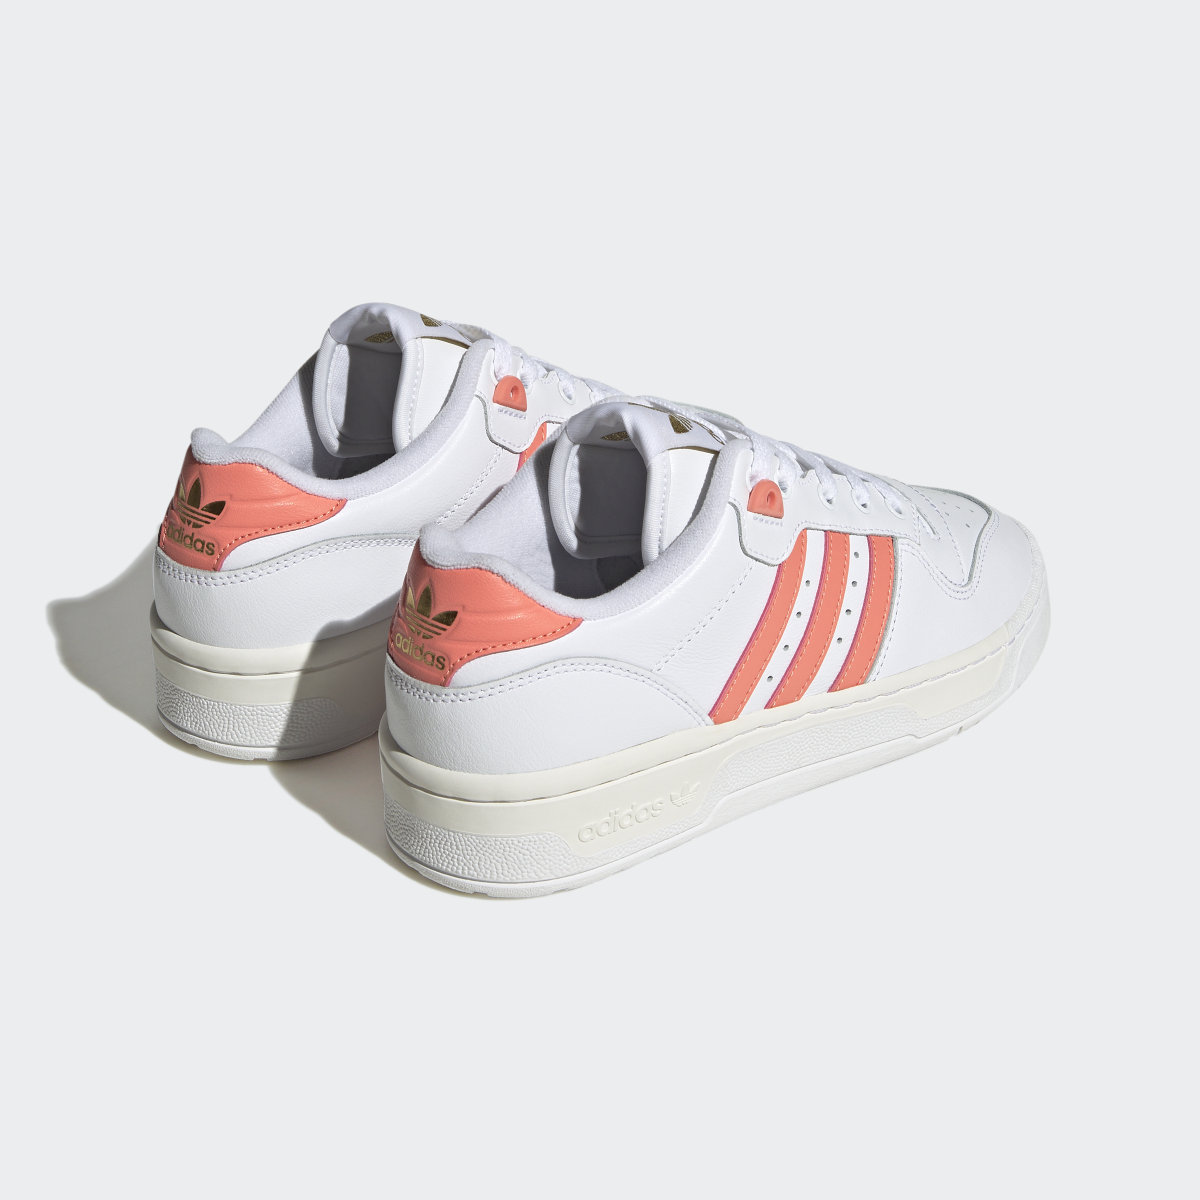 Adidas Rivalry Low Shoes. 6